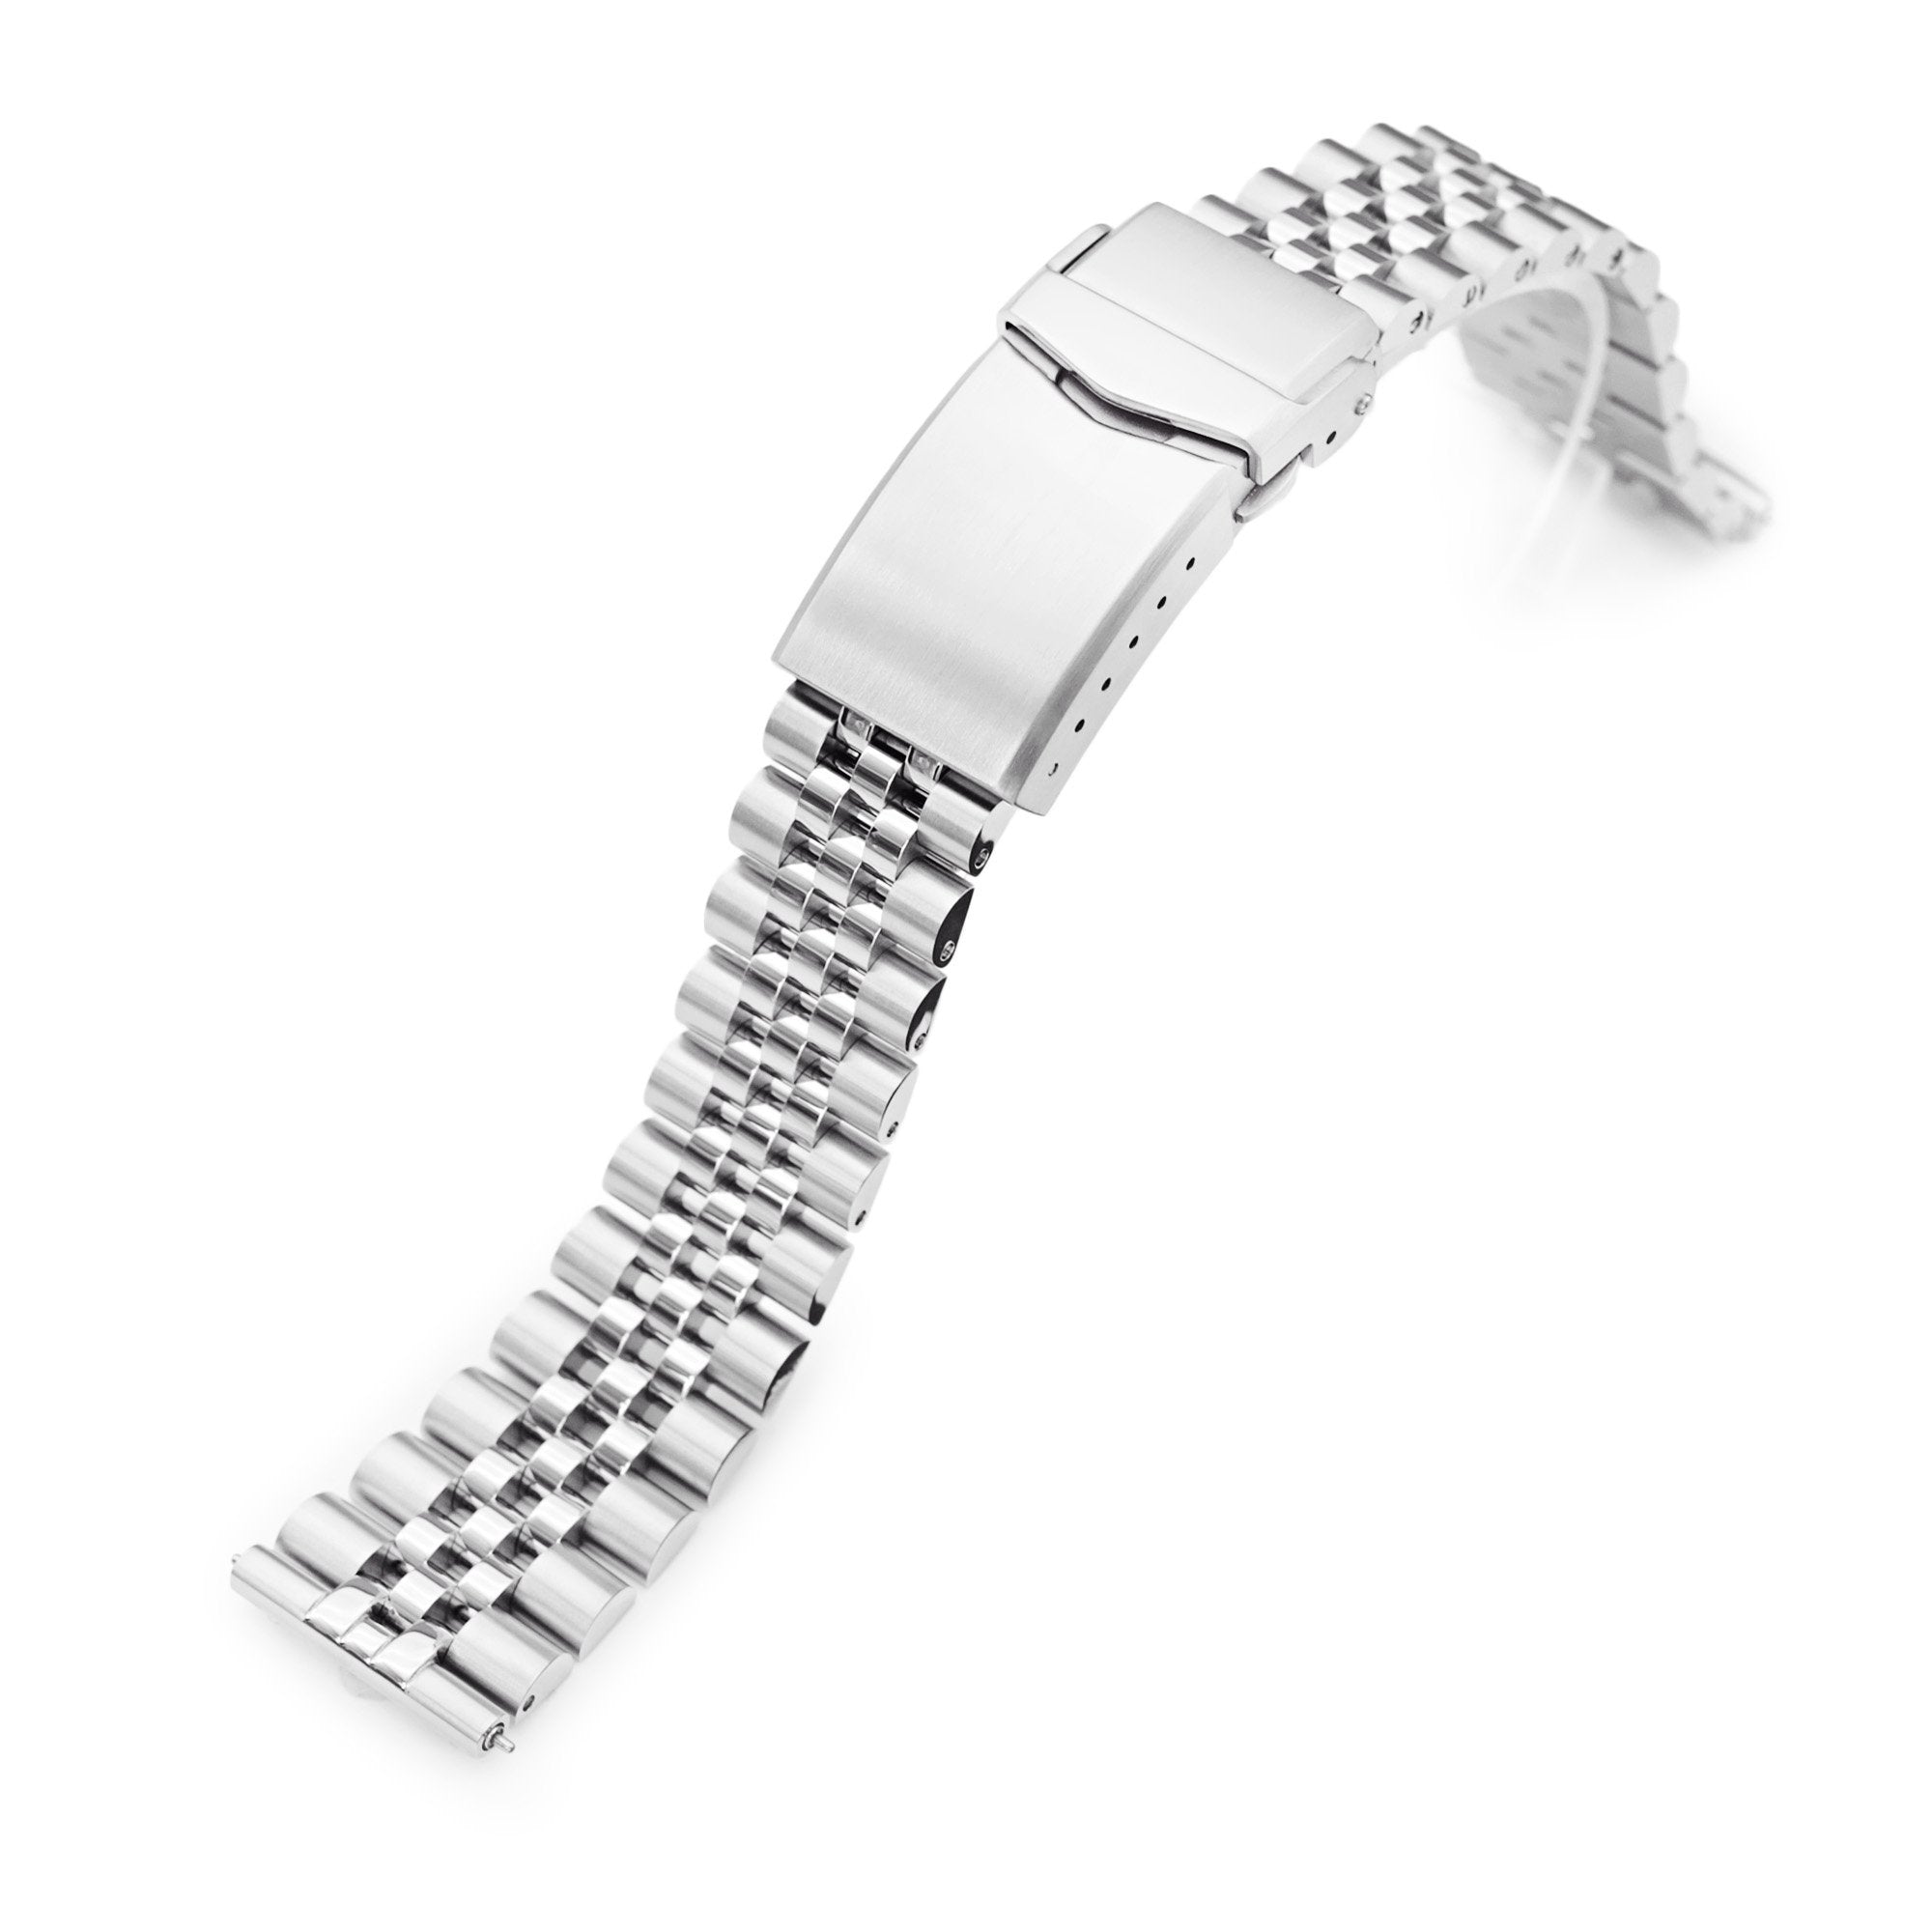 18mm, 19mm, 20mm Super-JUB II QR Watch Band Straight End Quick Release, 316L Stainless Steel Brushed V-Clasp Strapcode Watch Bands